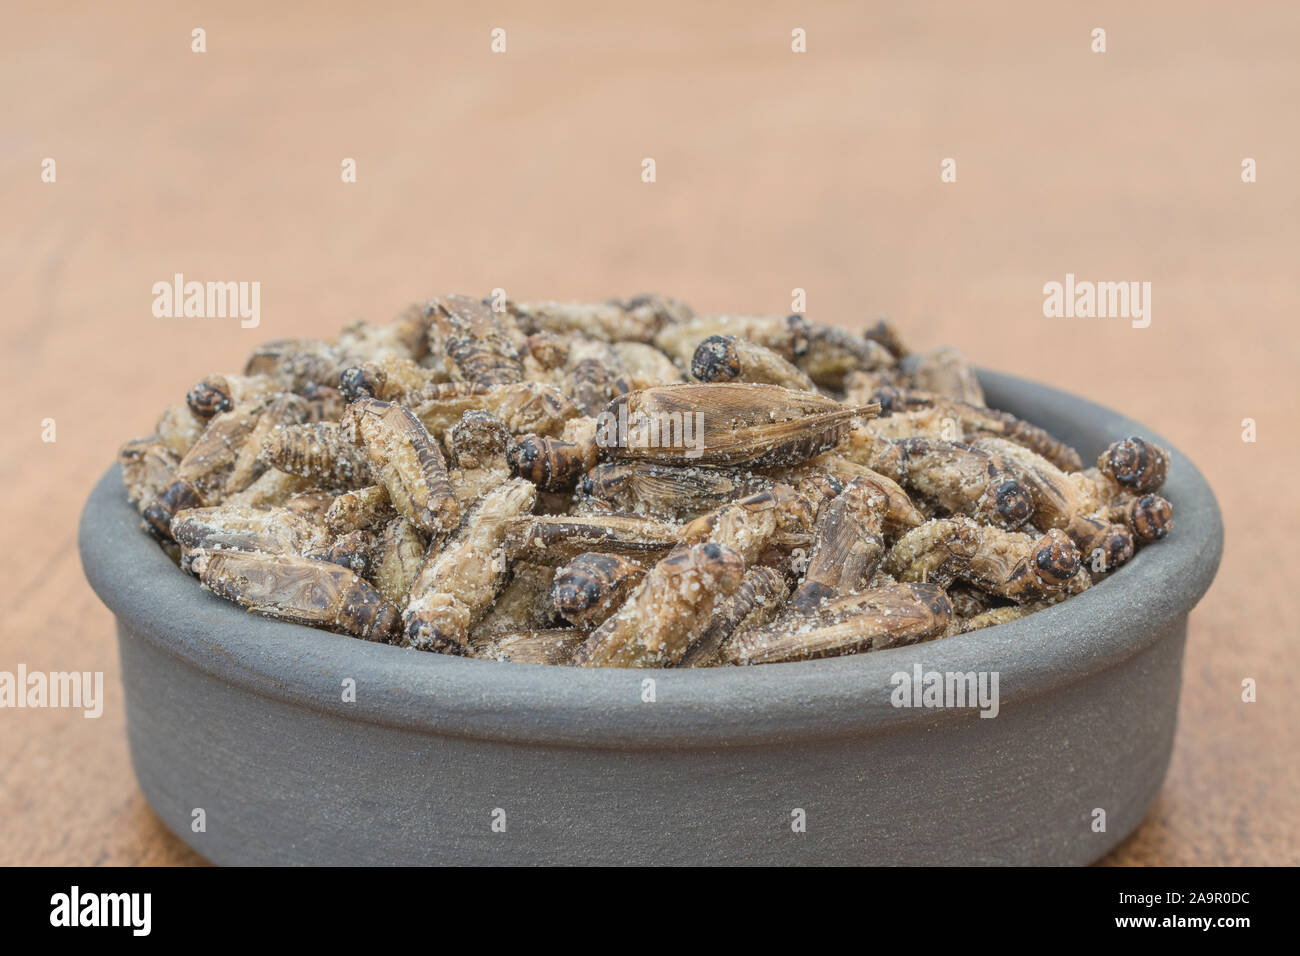 Edible insects - salted Small Crickets possibly Gryllus assimilis - on faux wood b/gd. Entomophagy, edible bugs, insect superfoods, insects as food. Stock Photo